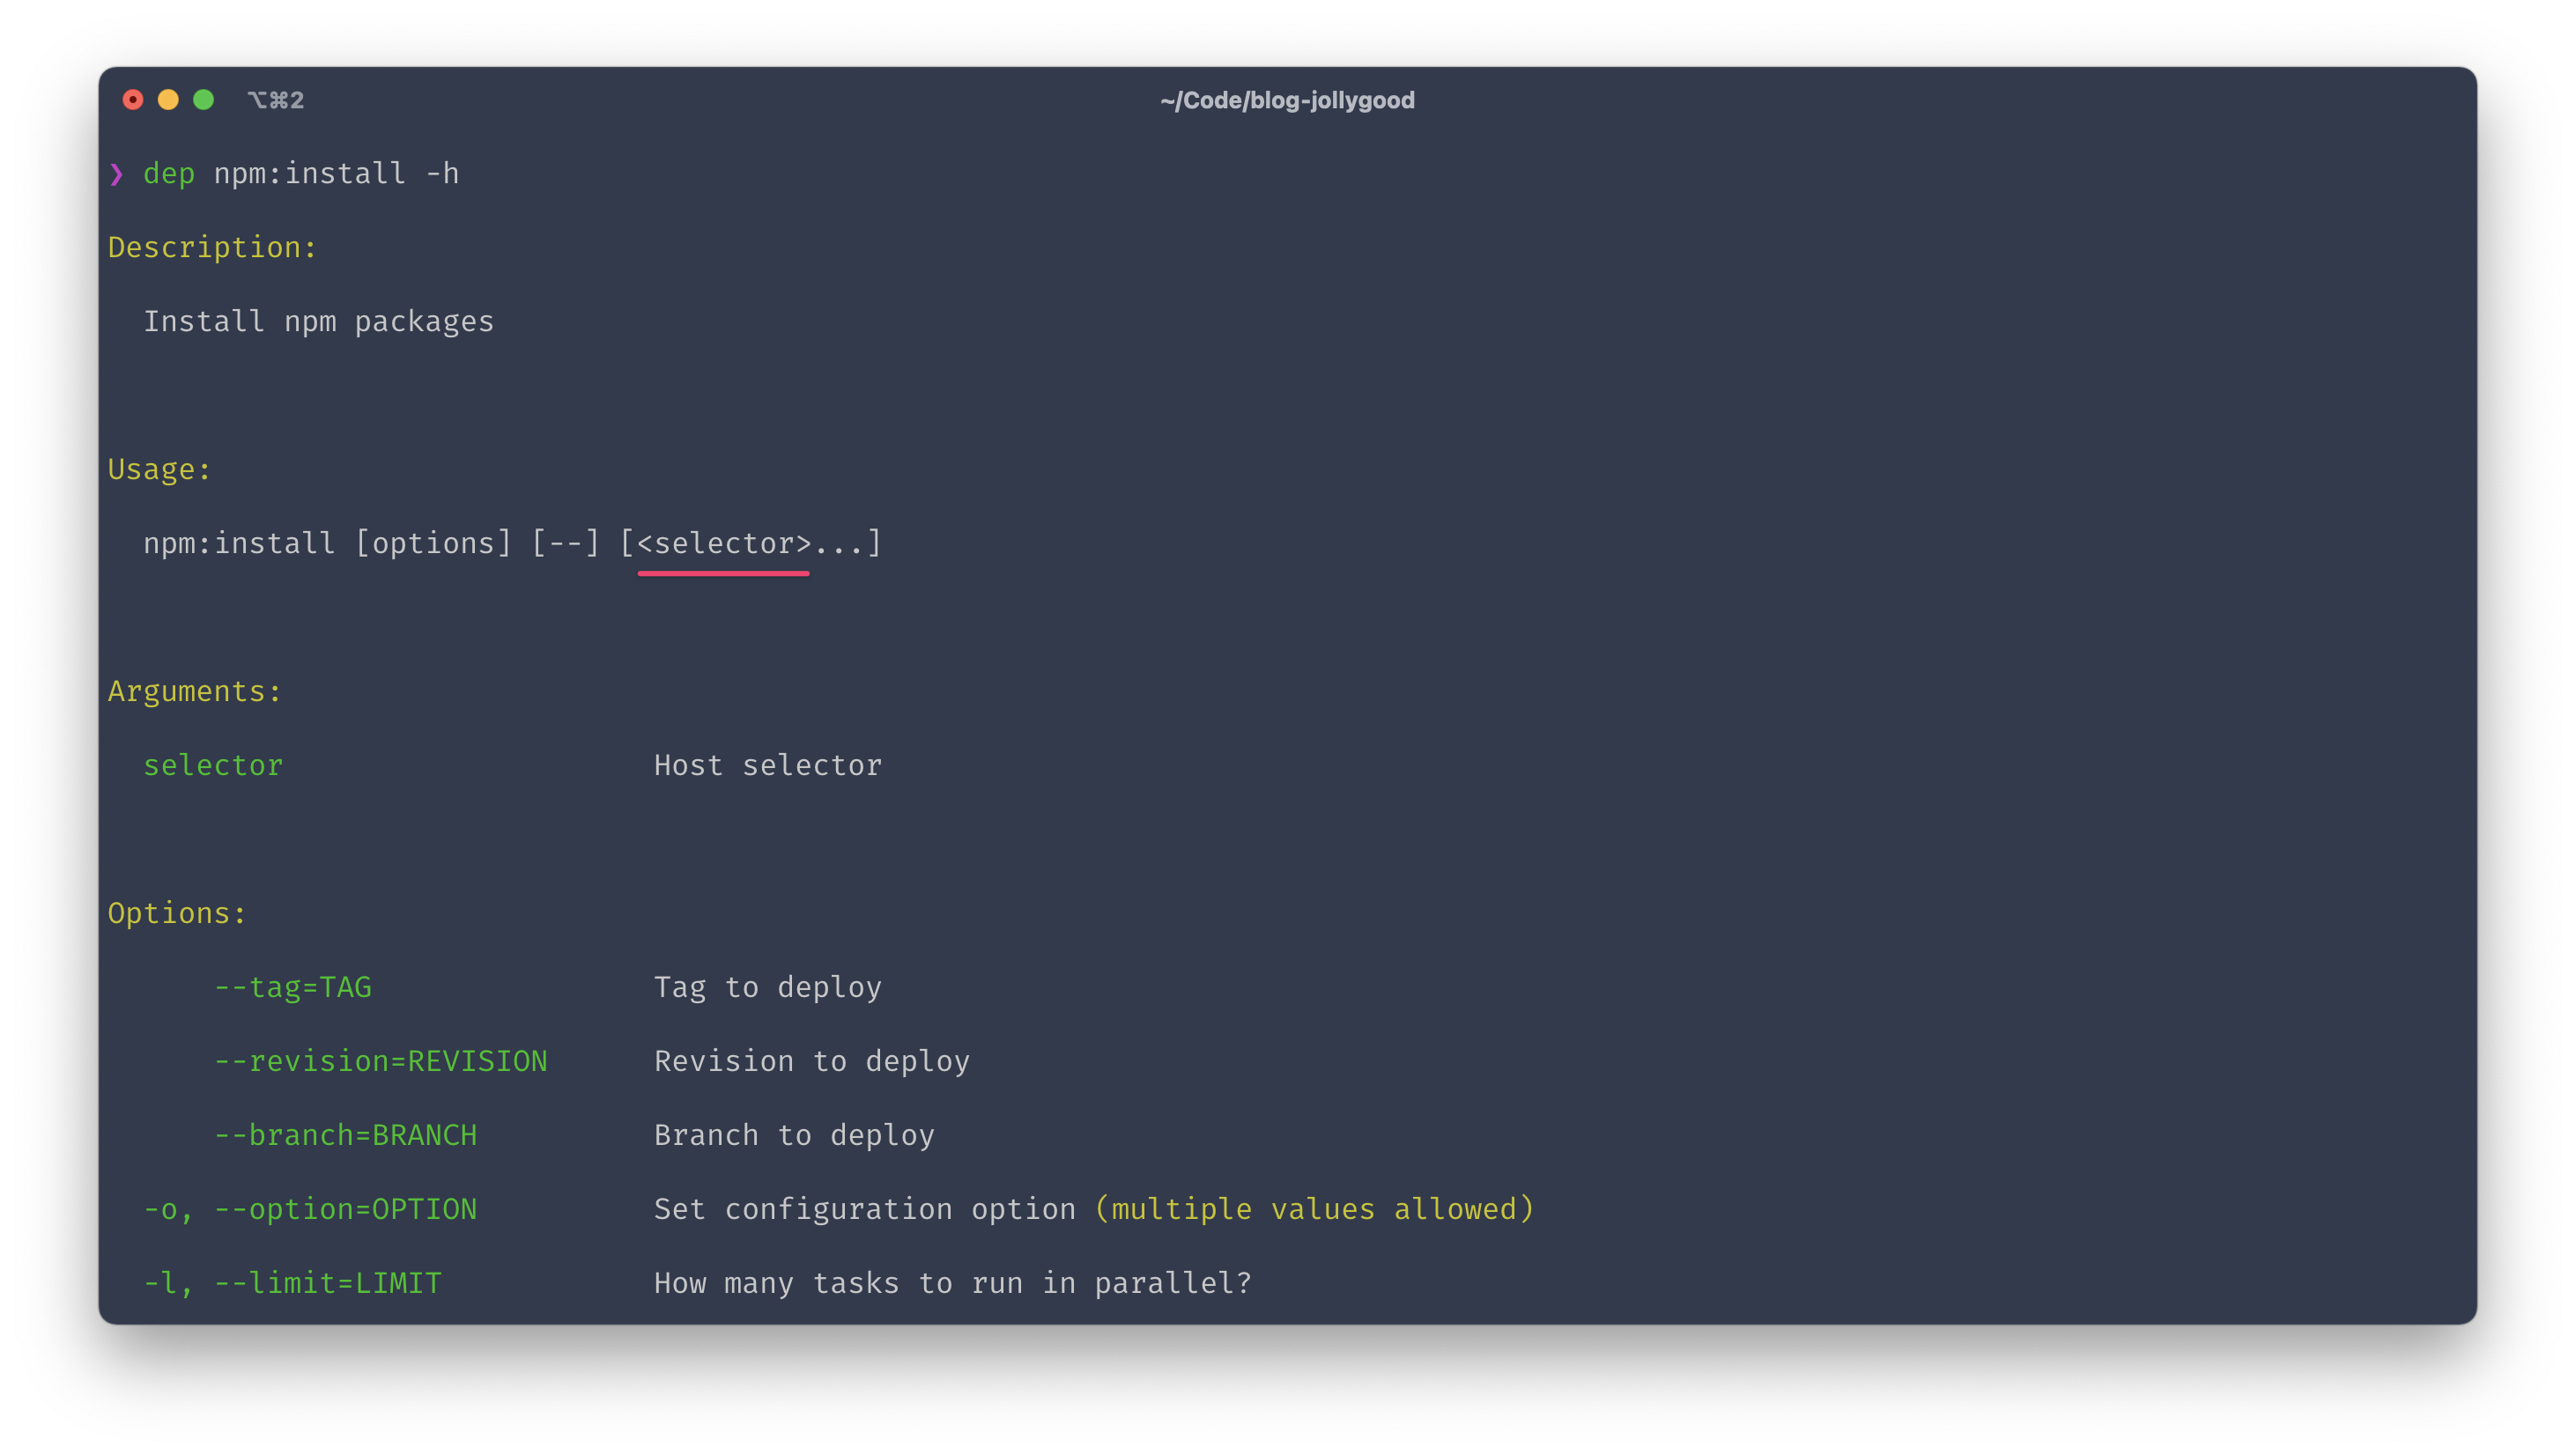 Screenshot of the terminal output for "dep npm:install -h" showing the help page of the task. The usage section shows: npm:install [options] [--] [<selector>…].